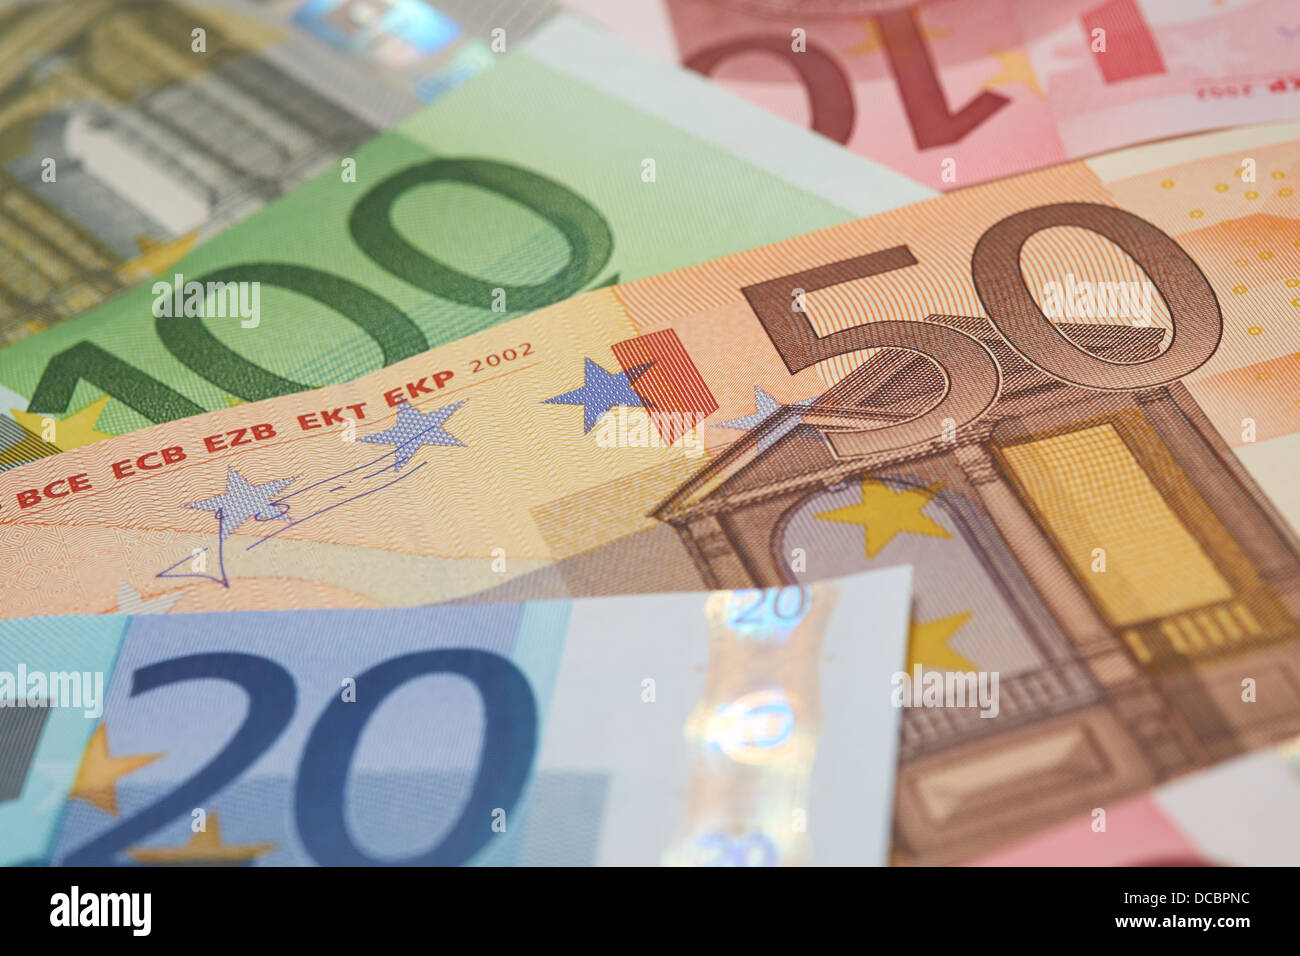 European Bank notes, Euro currency from Europe, Euros. Stock Photo